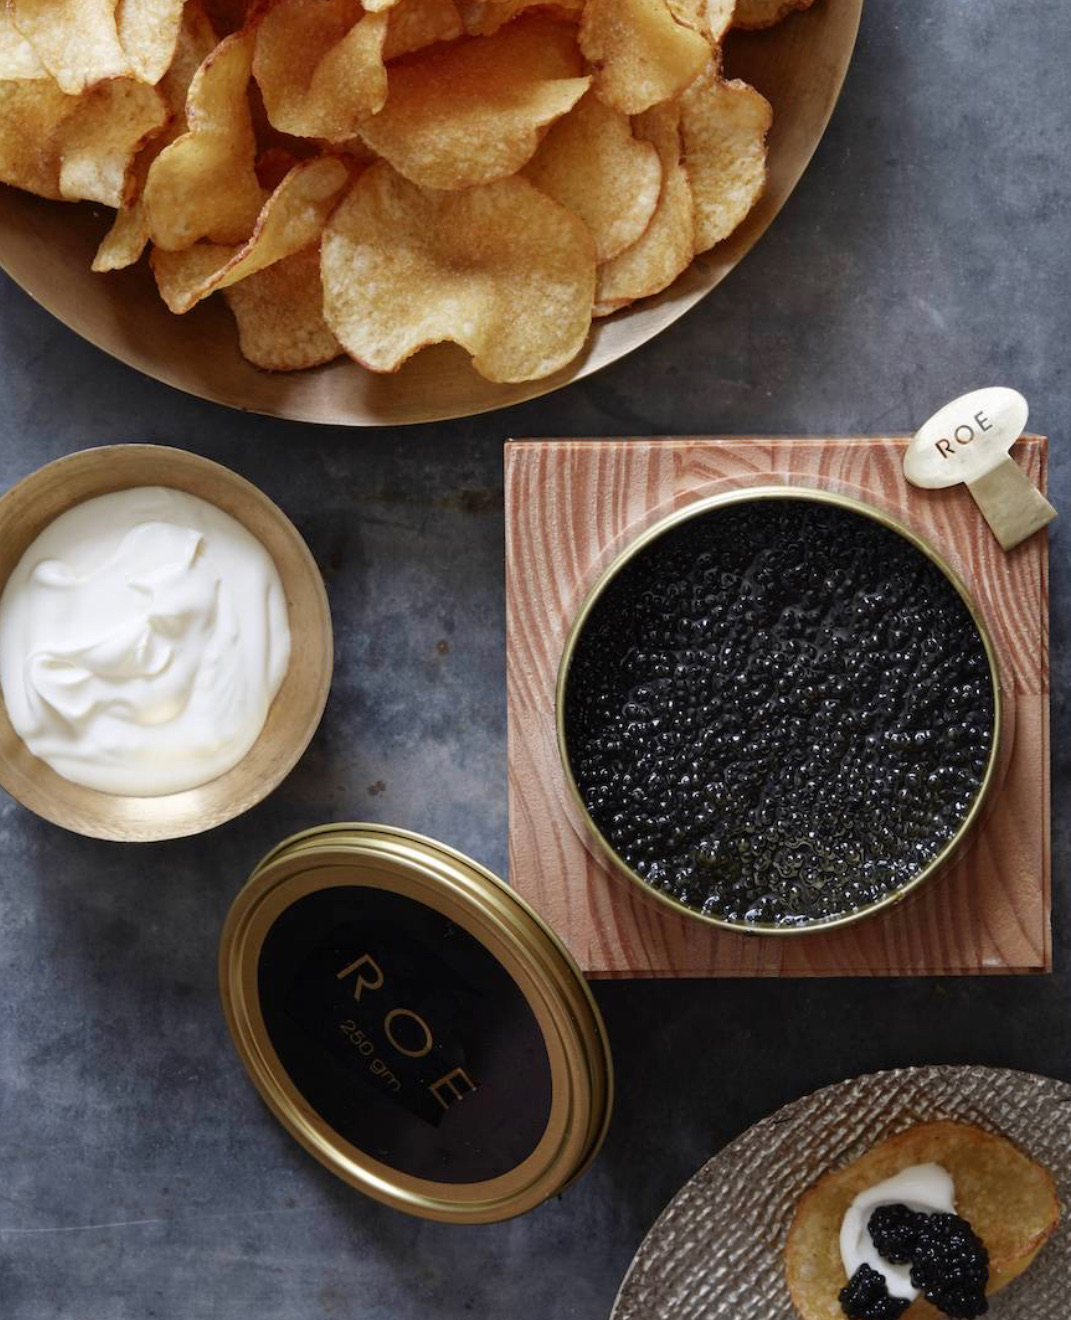 Junk food such as potato chips coupled with champagne and caviar is an amazing surprise